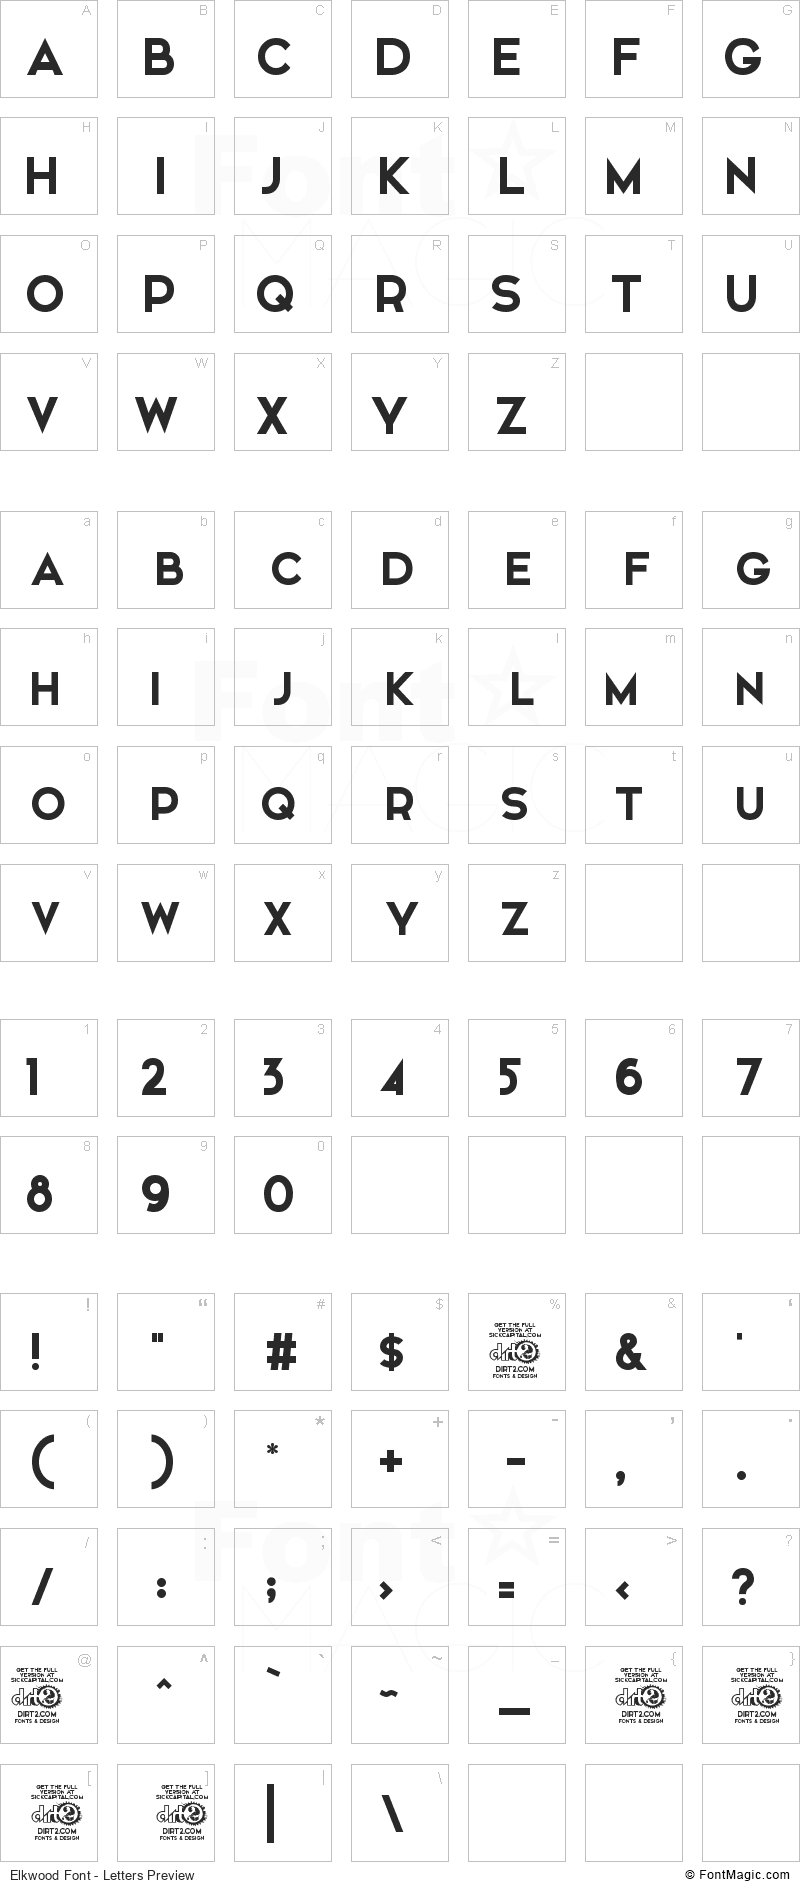 Elkwood Font - All Latters Preview Chart